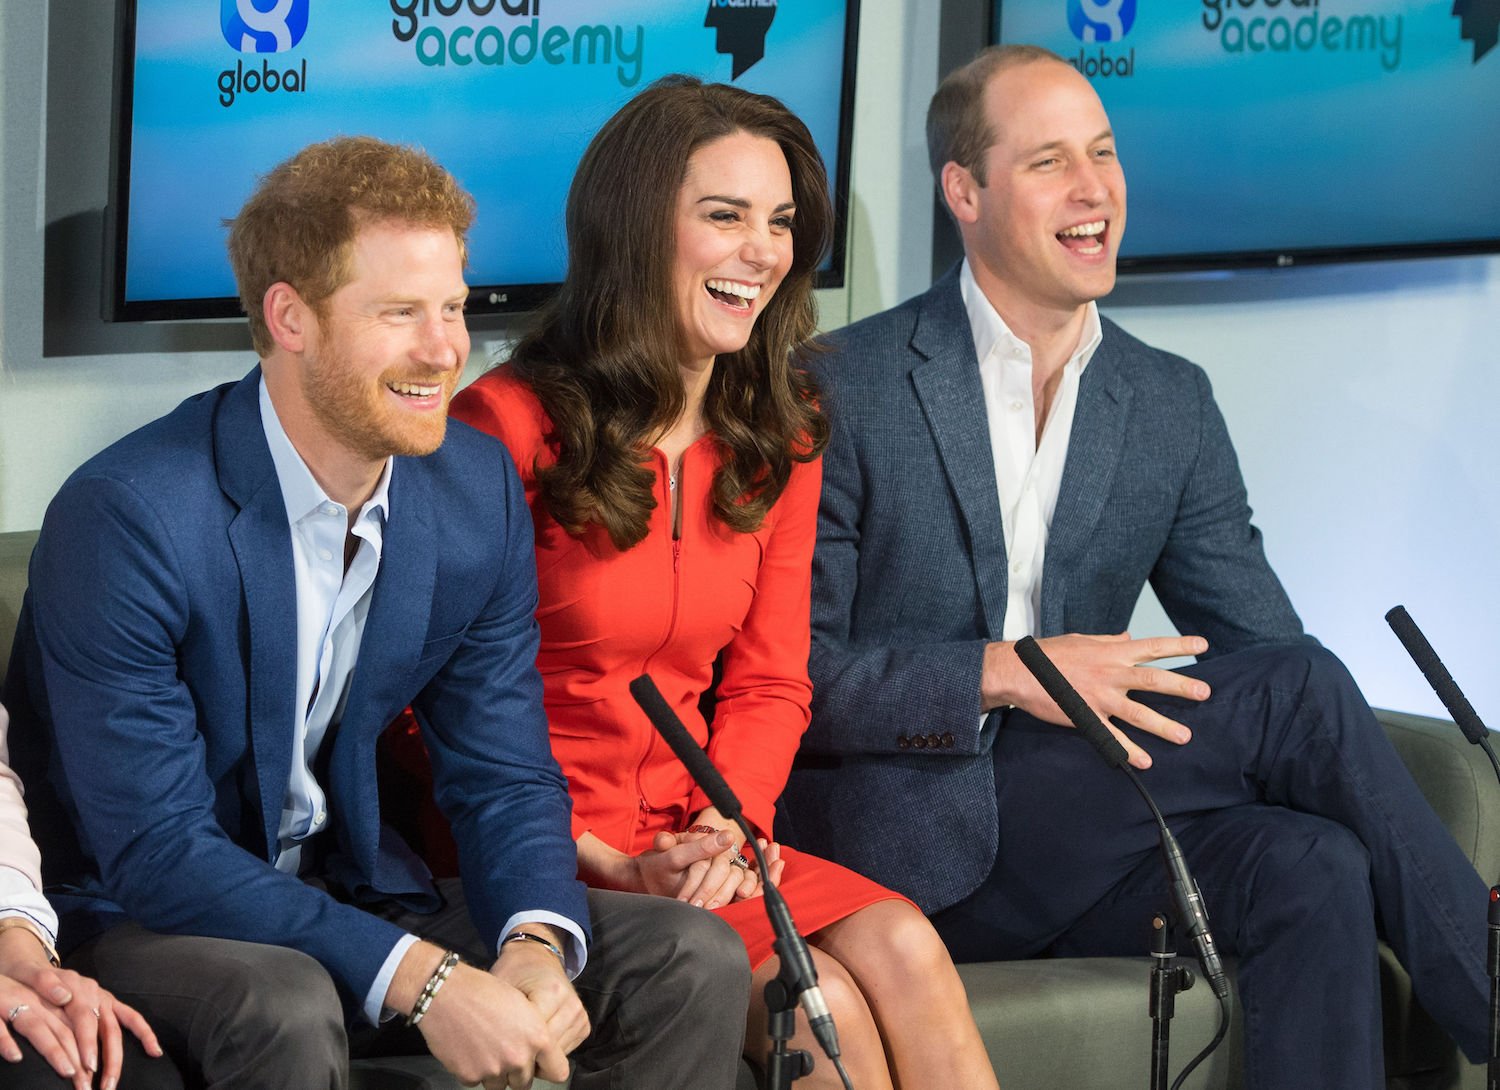 Prince Harry, Kate Middleton, Prince William laughing during 2017 opening of The Global Academy in support of Heads Together